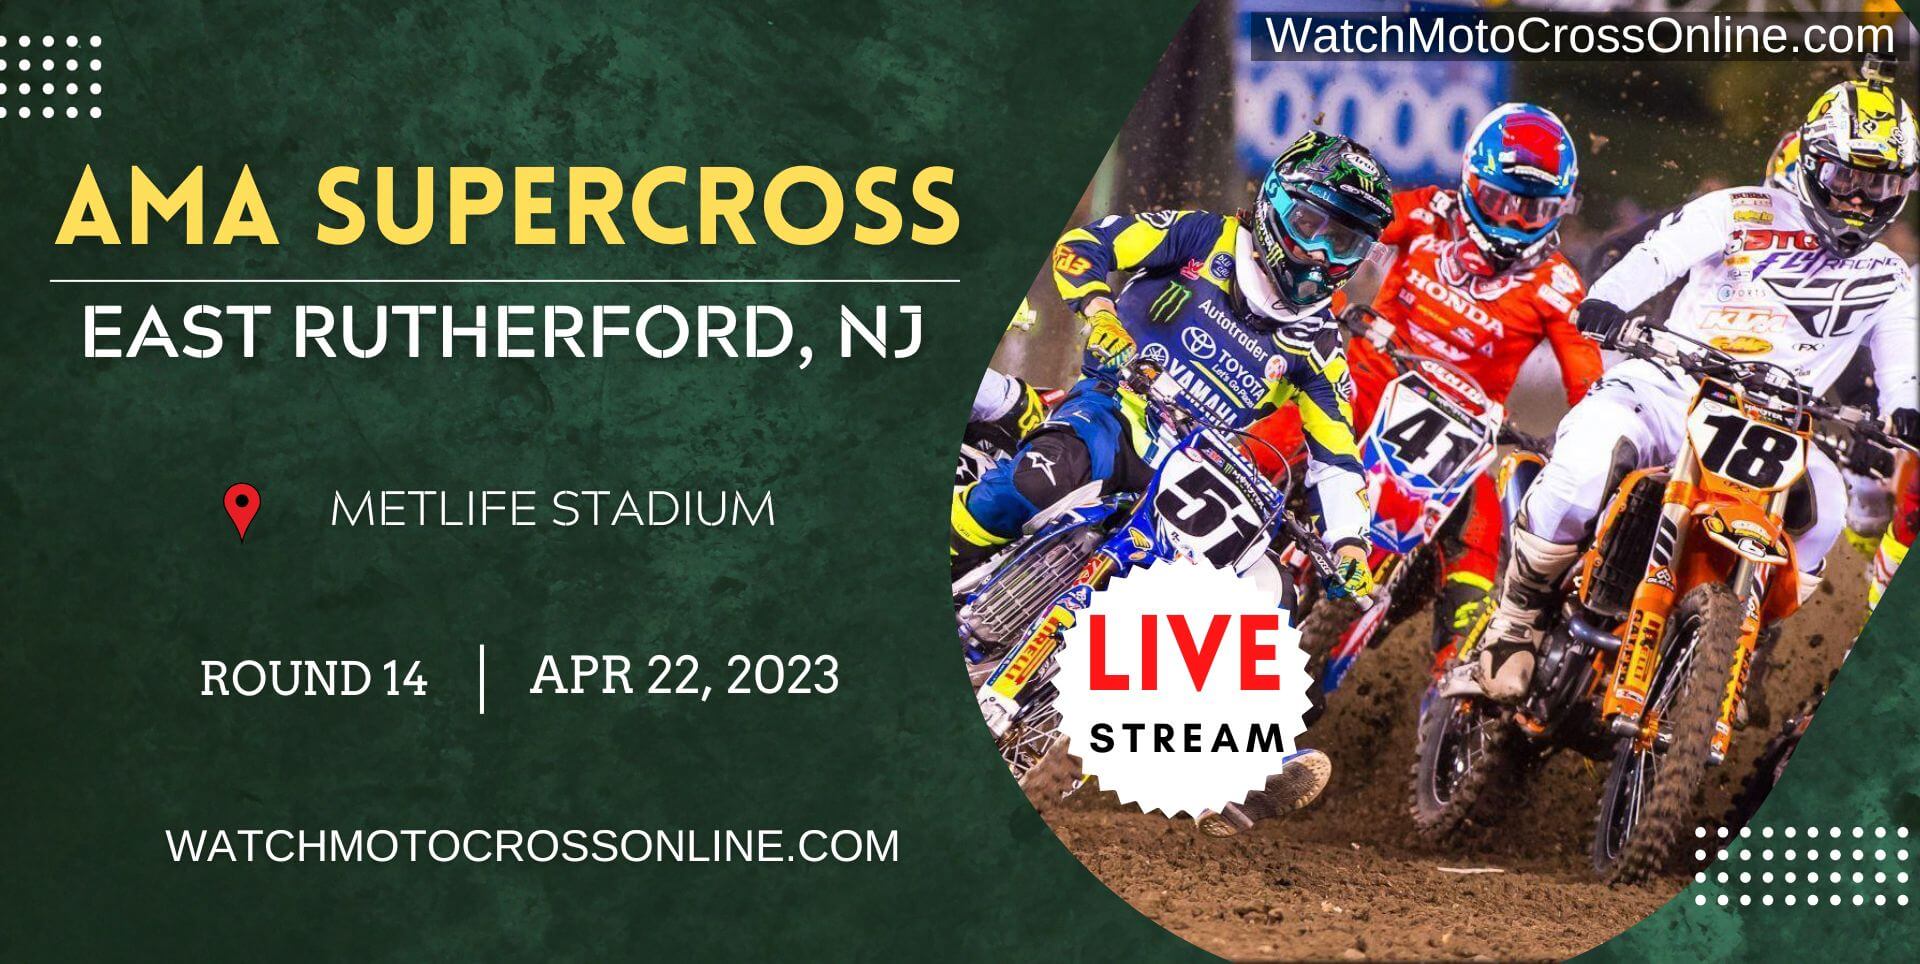 AMA Supercross East Rutherford Live Stream 2023 | Round 14